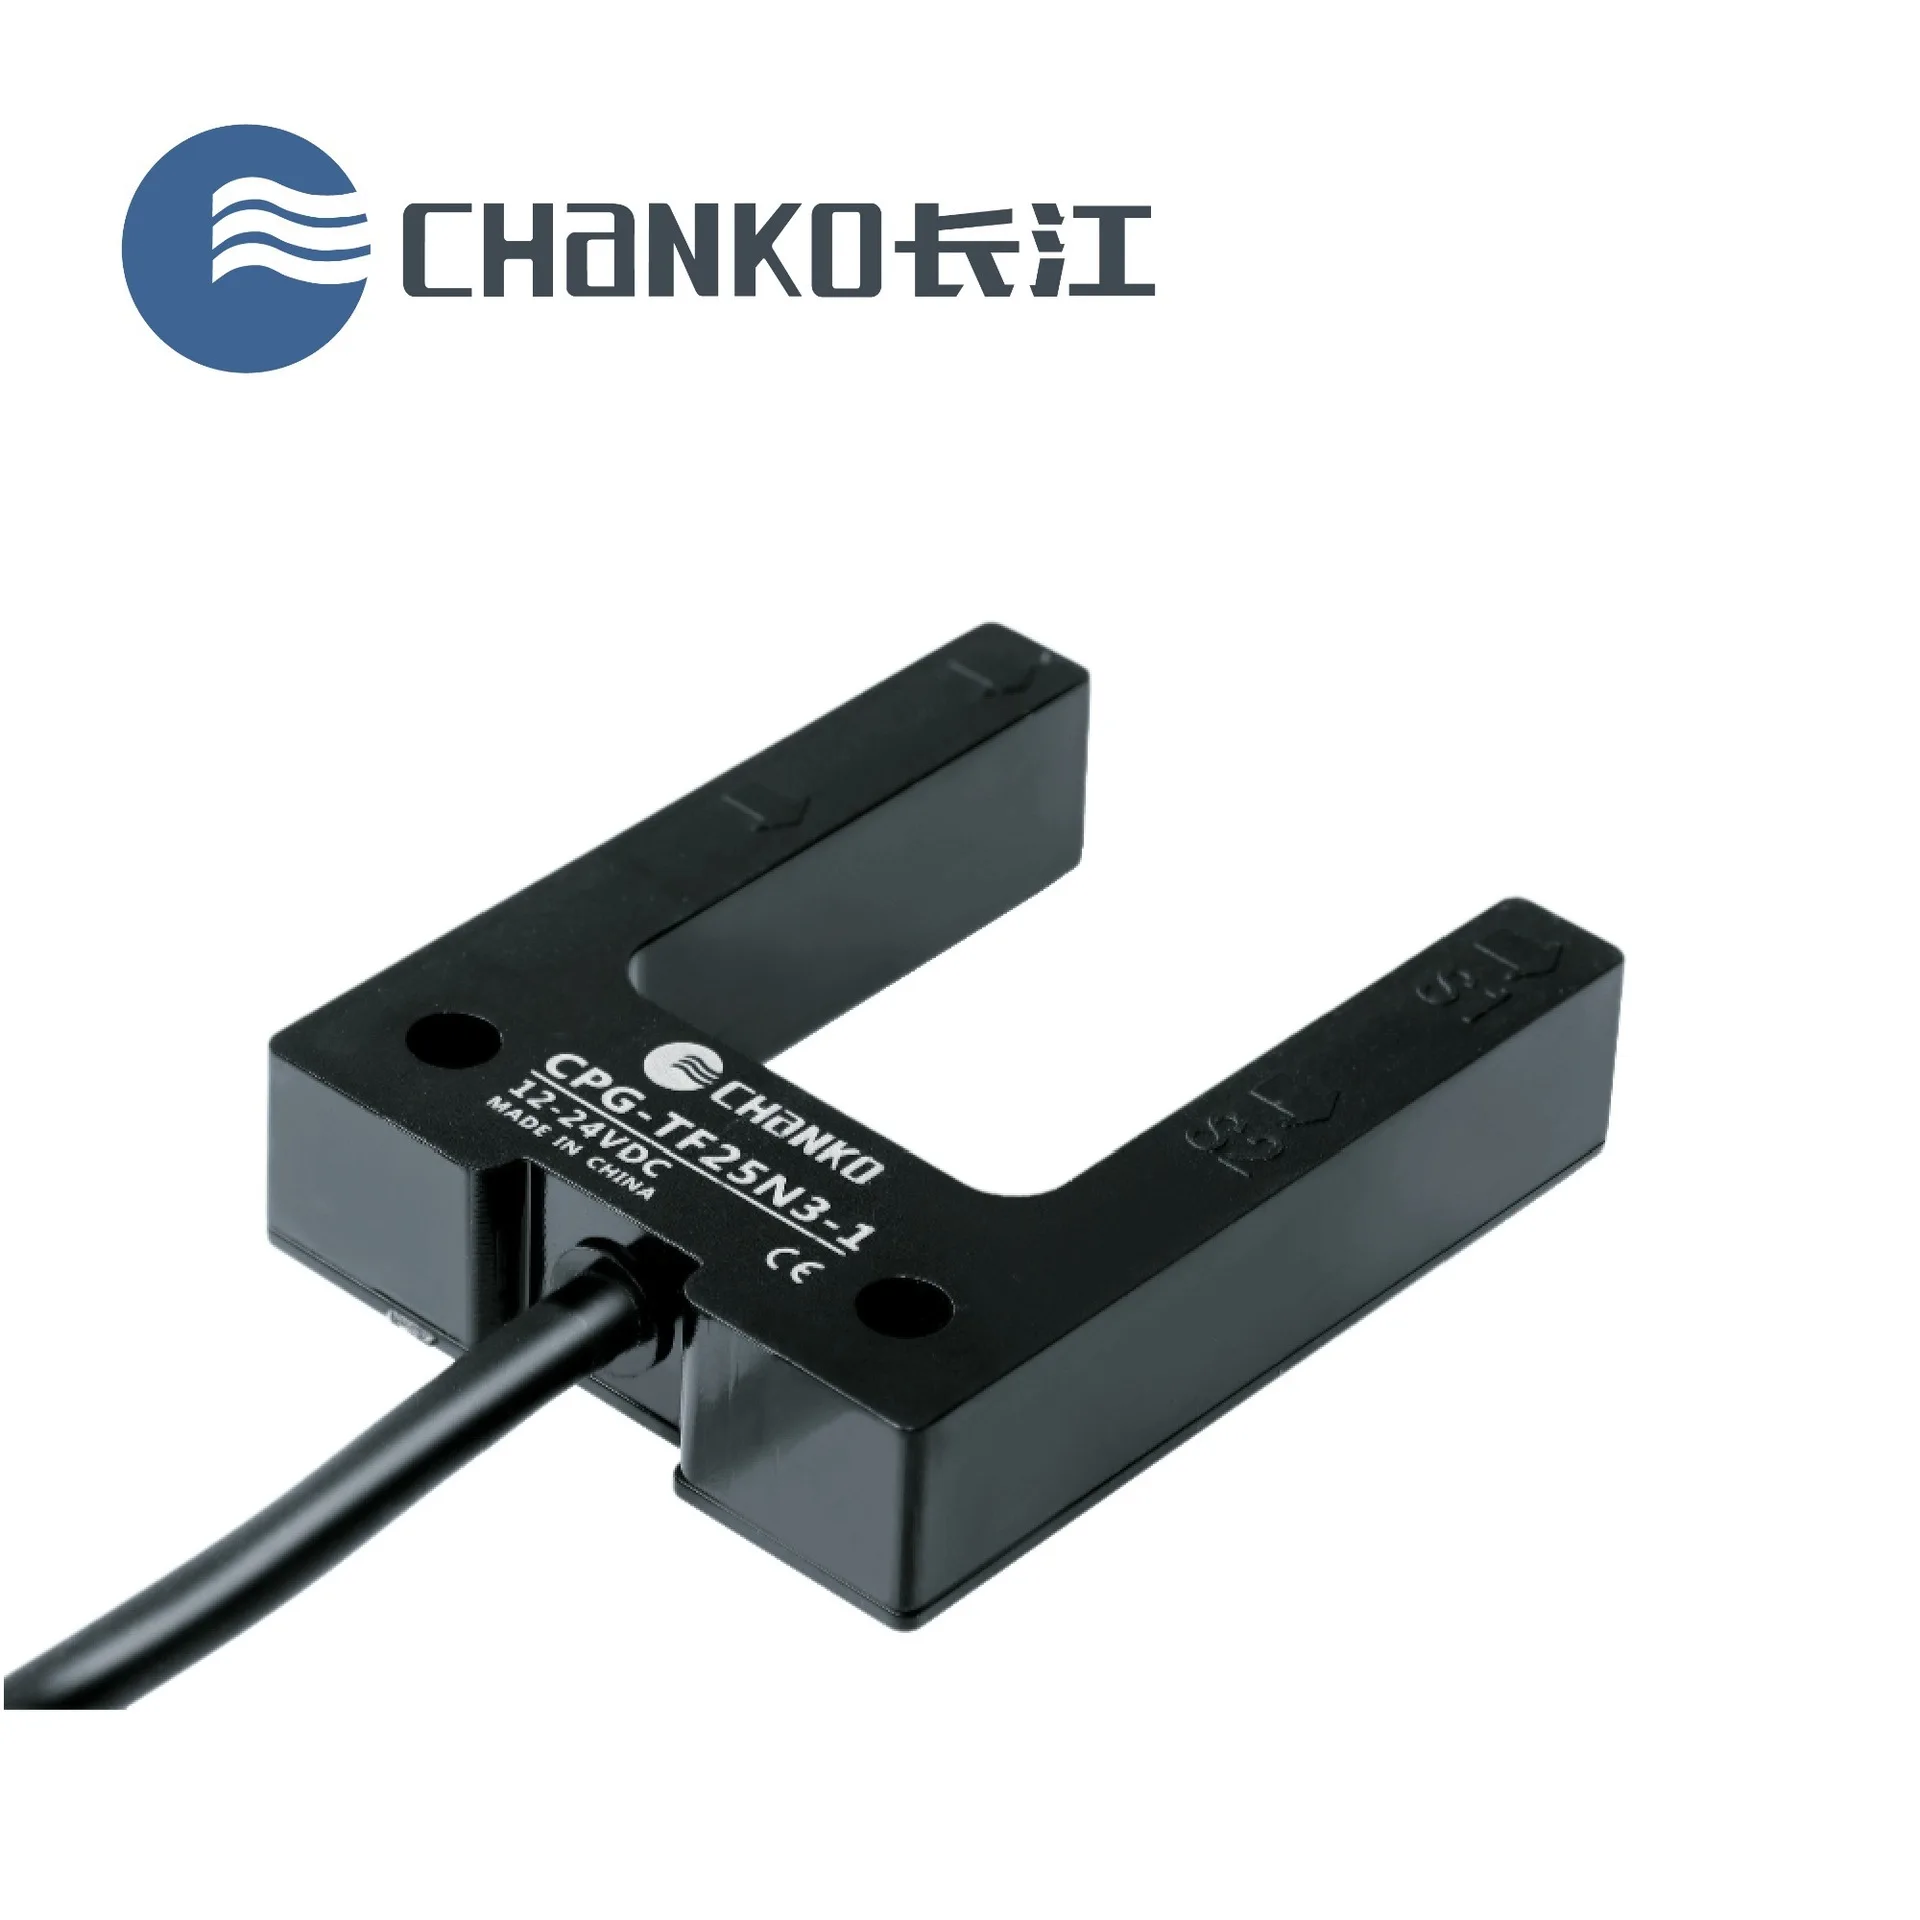 

Applicable to Chanko/Changjiang CPG-TF25P3-1 Large Groove Photoelectric Sensor 25mm Groove Width U-Shaped Limit